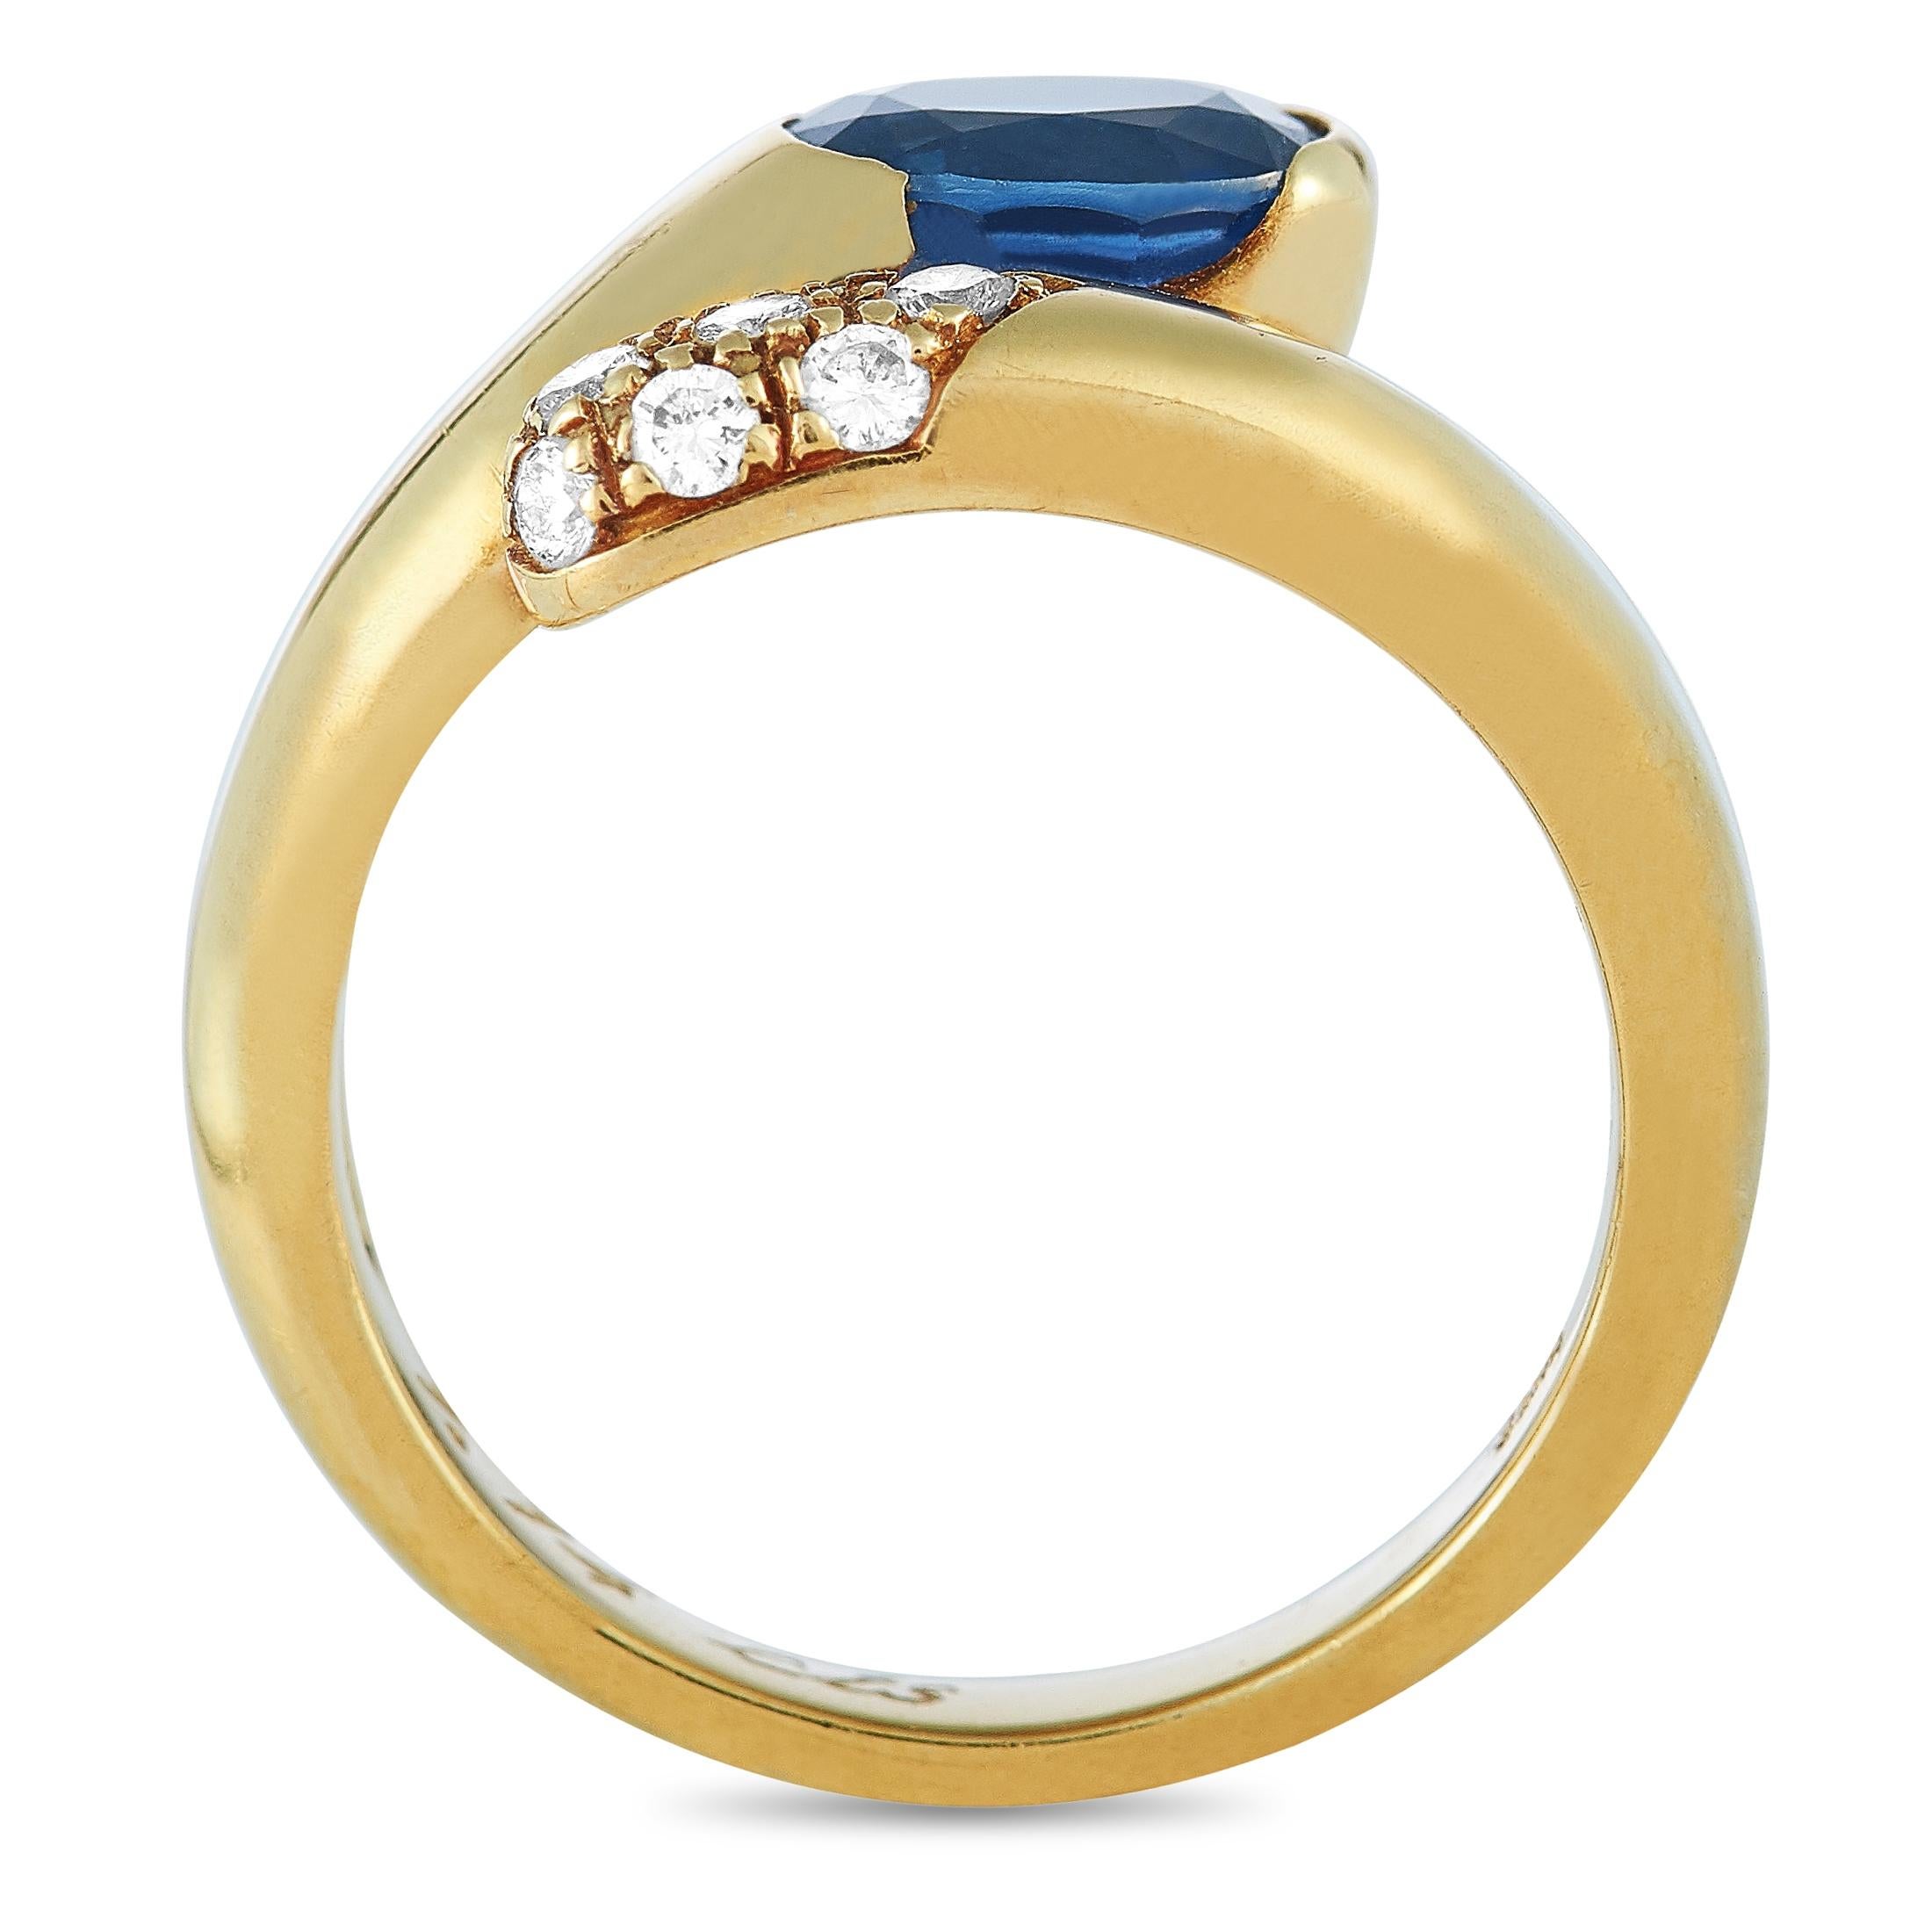 This Bvlgari ring is crafted from 18K yellow gold and weighs 5.7 grams. It boasts band thickness of 2 mm and top height of 4 mm, while top dimensions measure 10 by 9 mm. The ring is set with a 0.60 ct sapphire and a total of 0.20 carats of